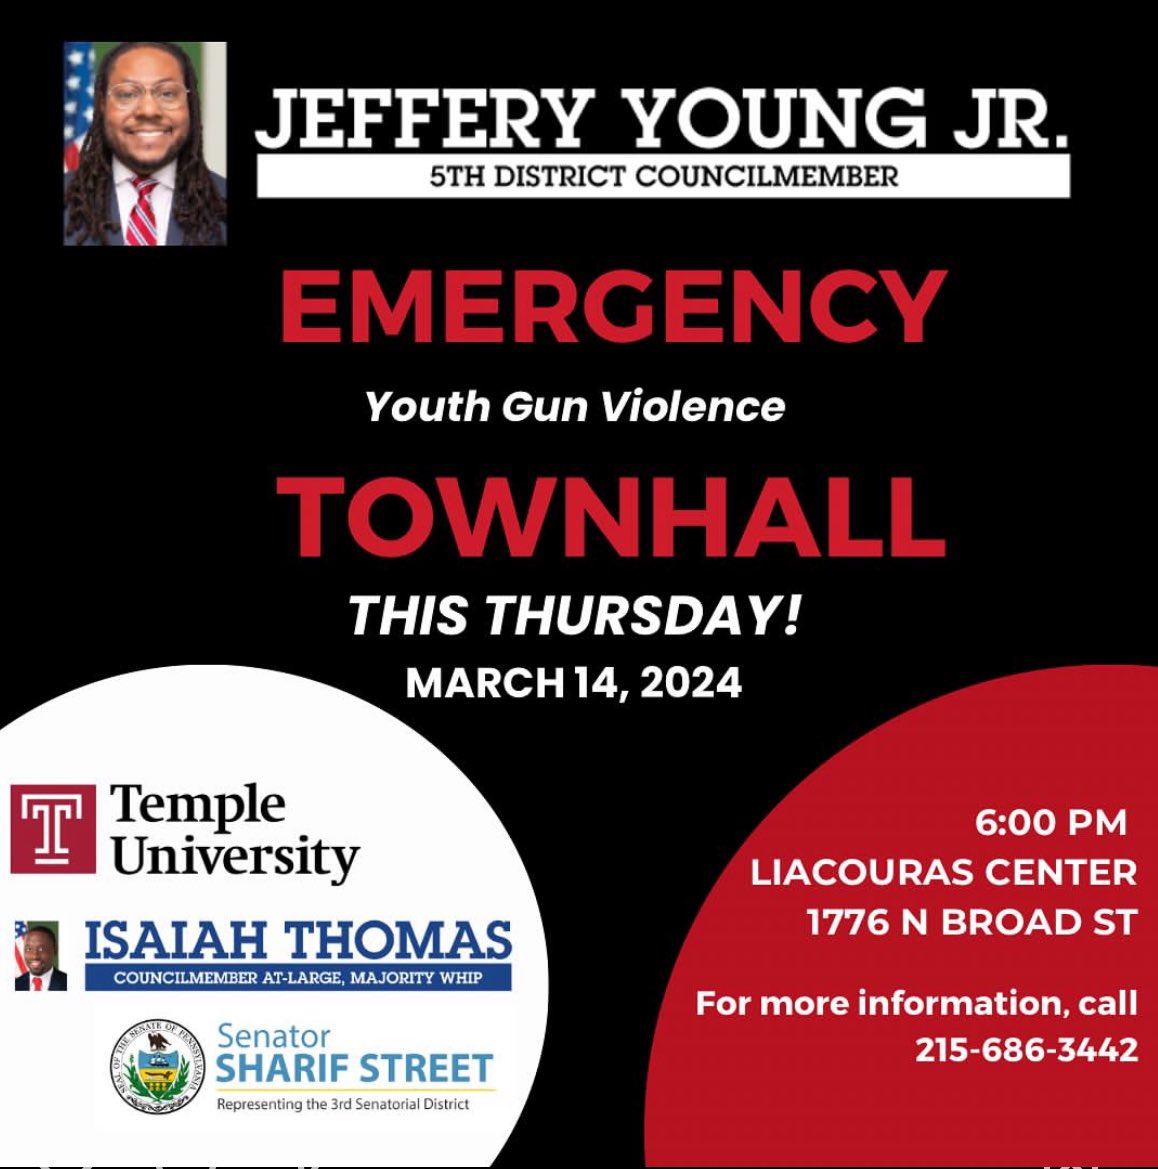 CM Jeffery Young, @SenSharifStreet and I will be hosting an emergency town hall on youth gun violence in our city. We know the ripple effect gun violence has on our families, friends, and communities, so mark your calendars and please spread the word.